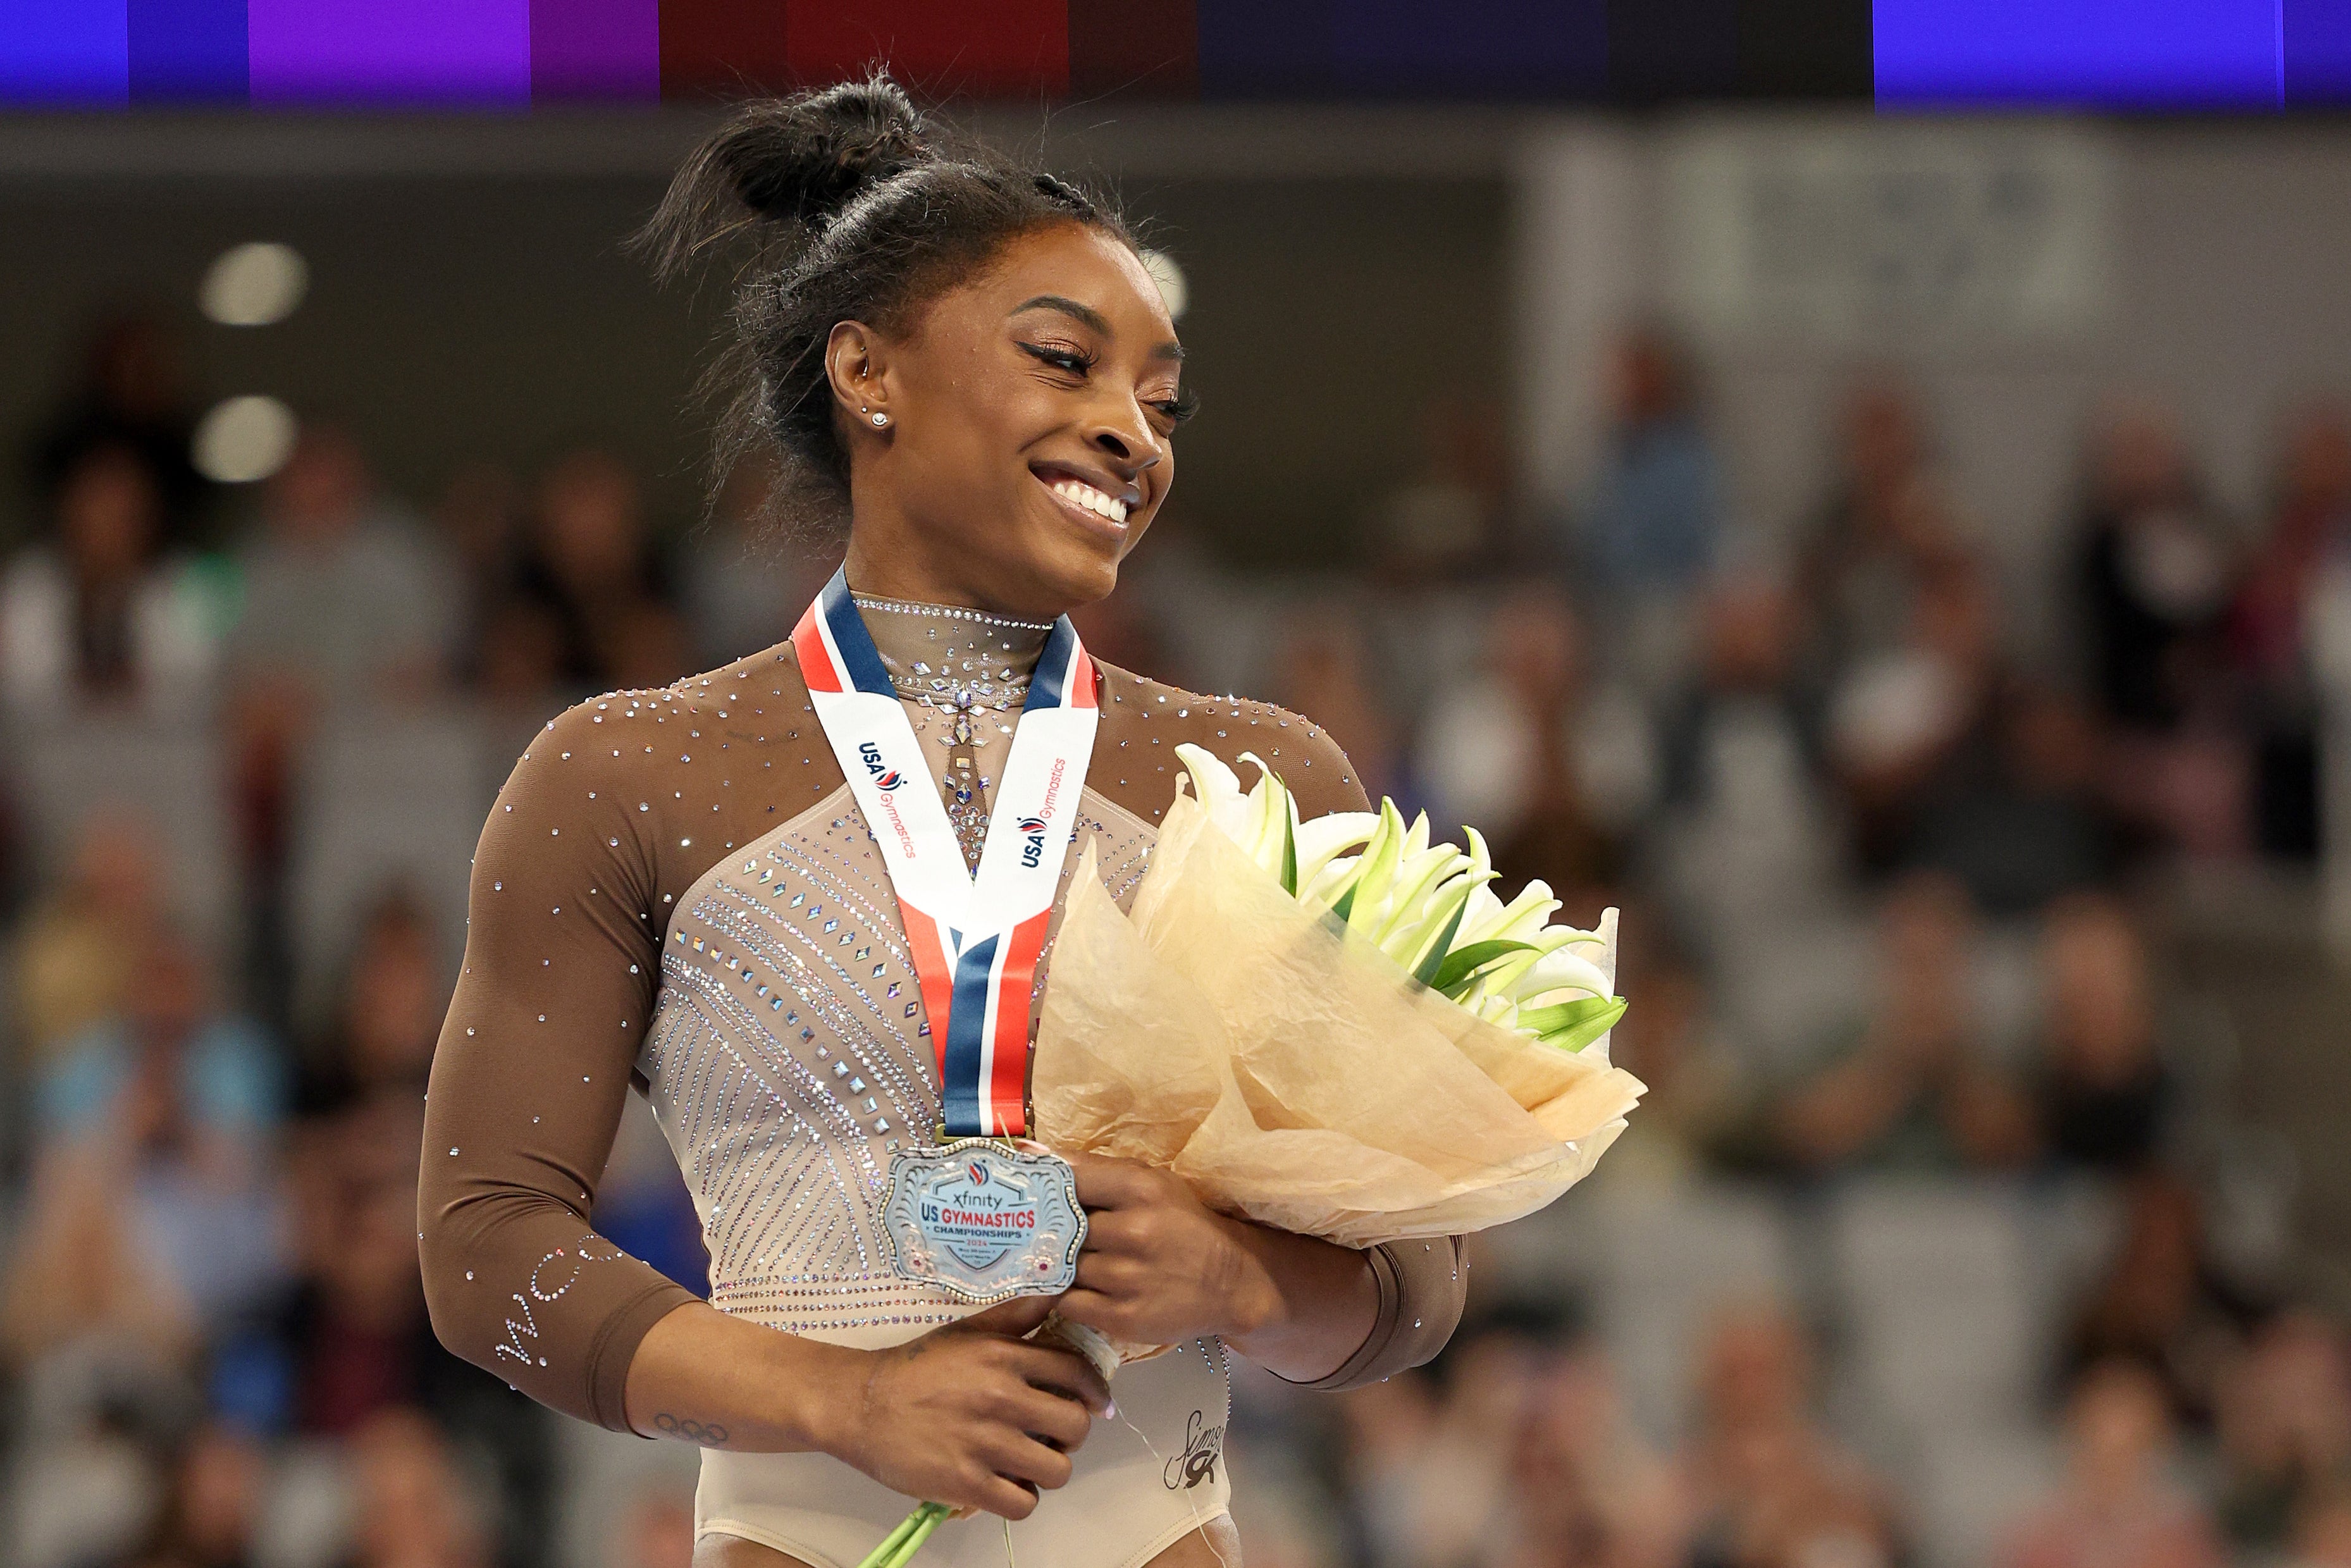 Simone Biles secured her ninth all-around title at the US Championships